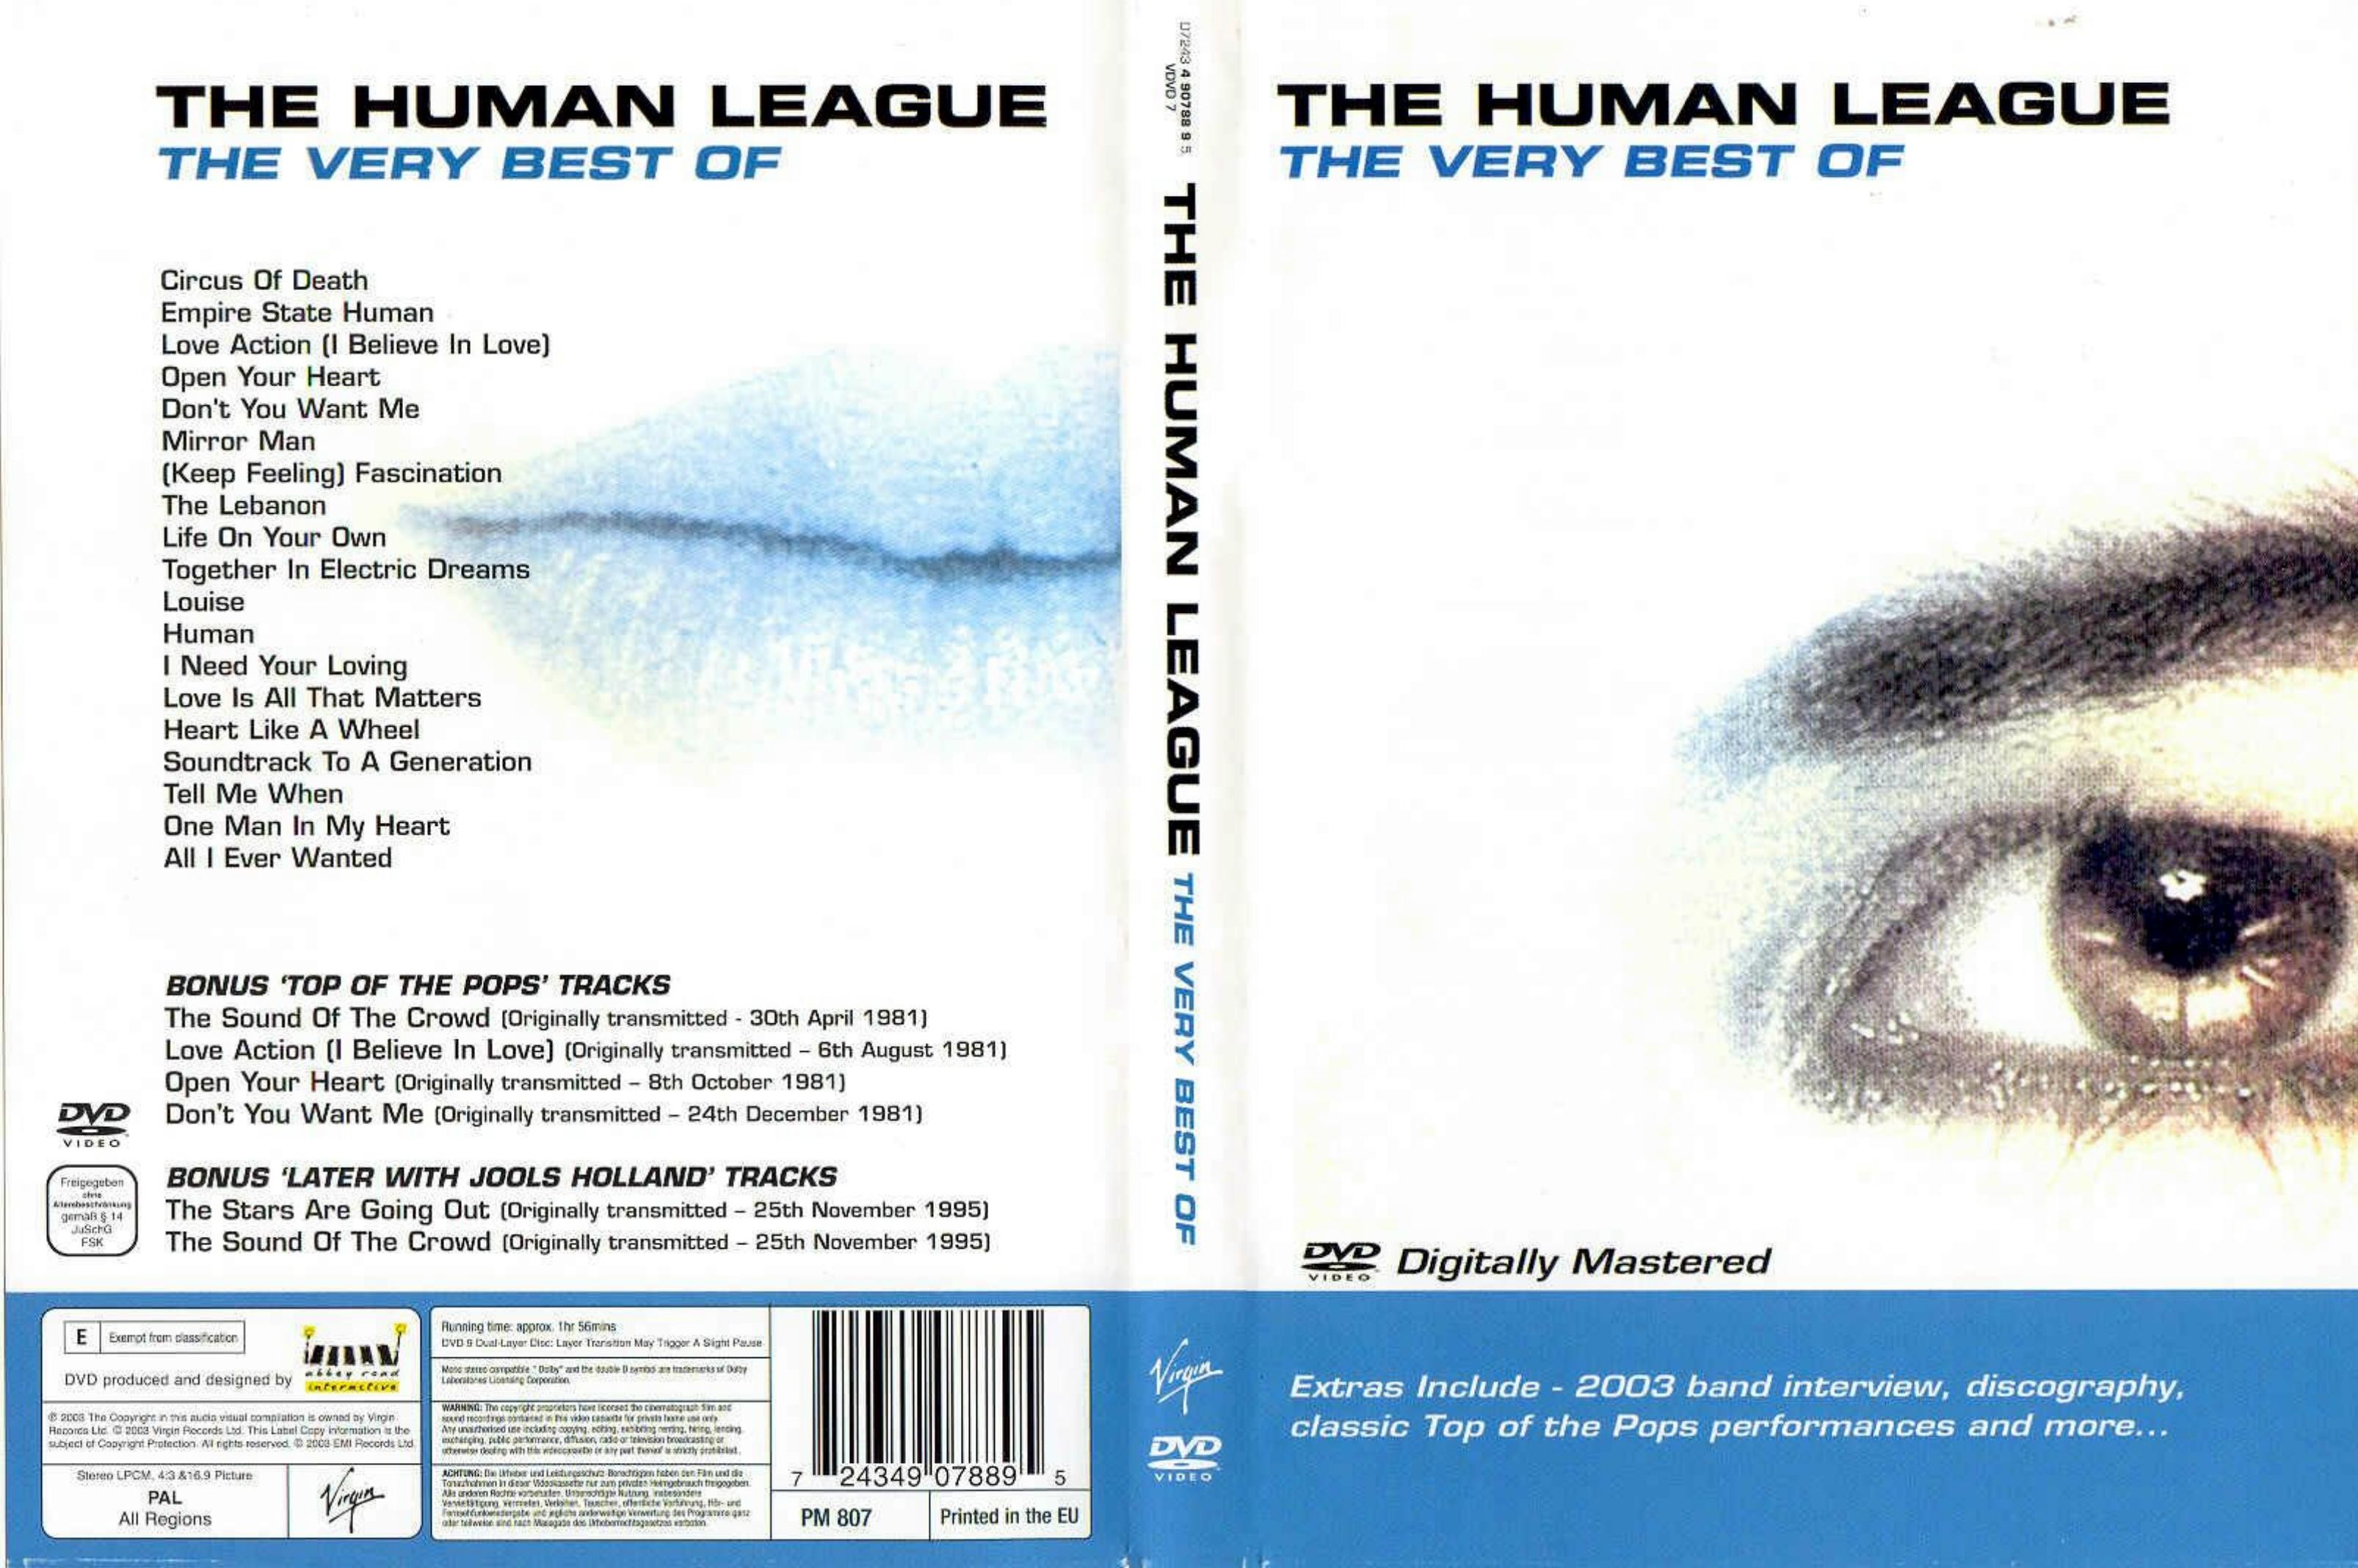 Jaquette DVD The human league Best of